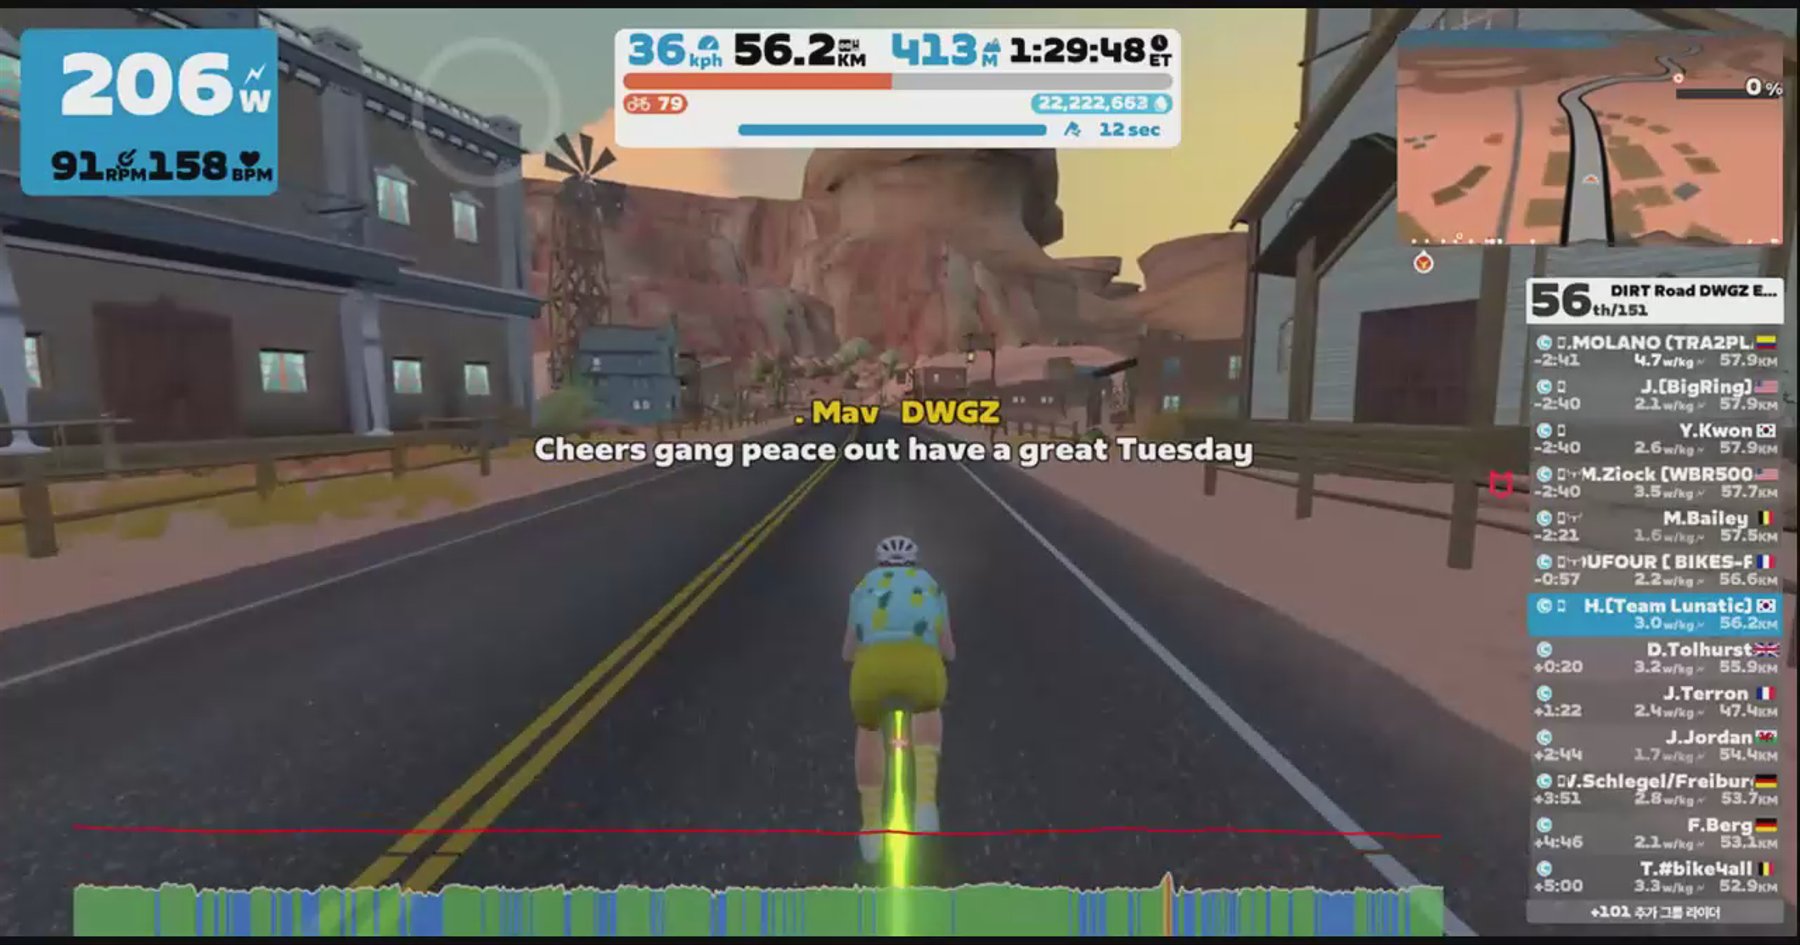 Zwift - Group Ride: DIRT Road DWGZ Endurance - Who let the DAWGZ out?  (C) on Eastern Eight in Watopia